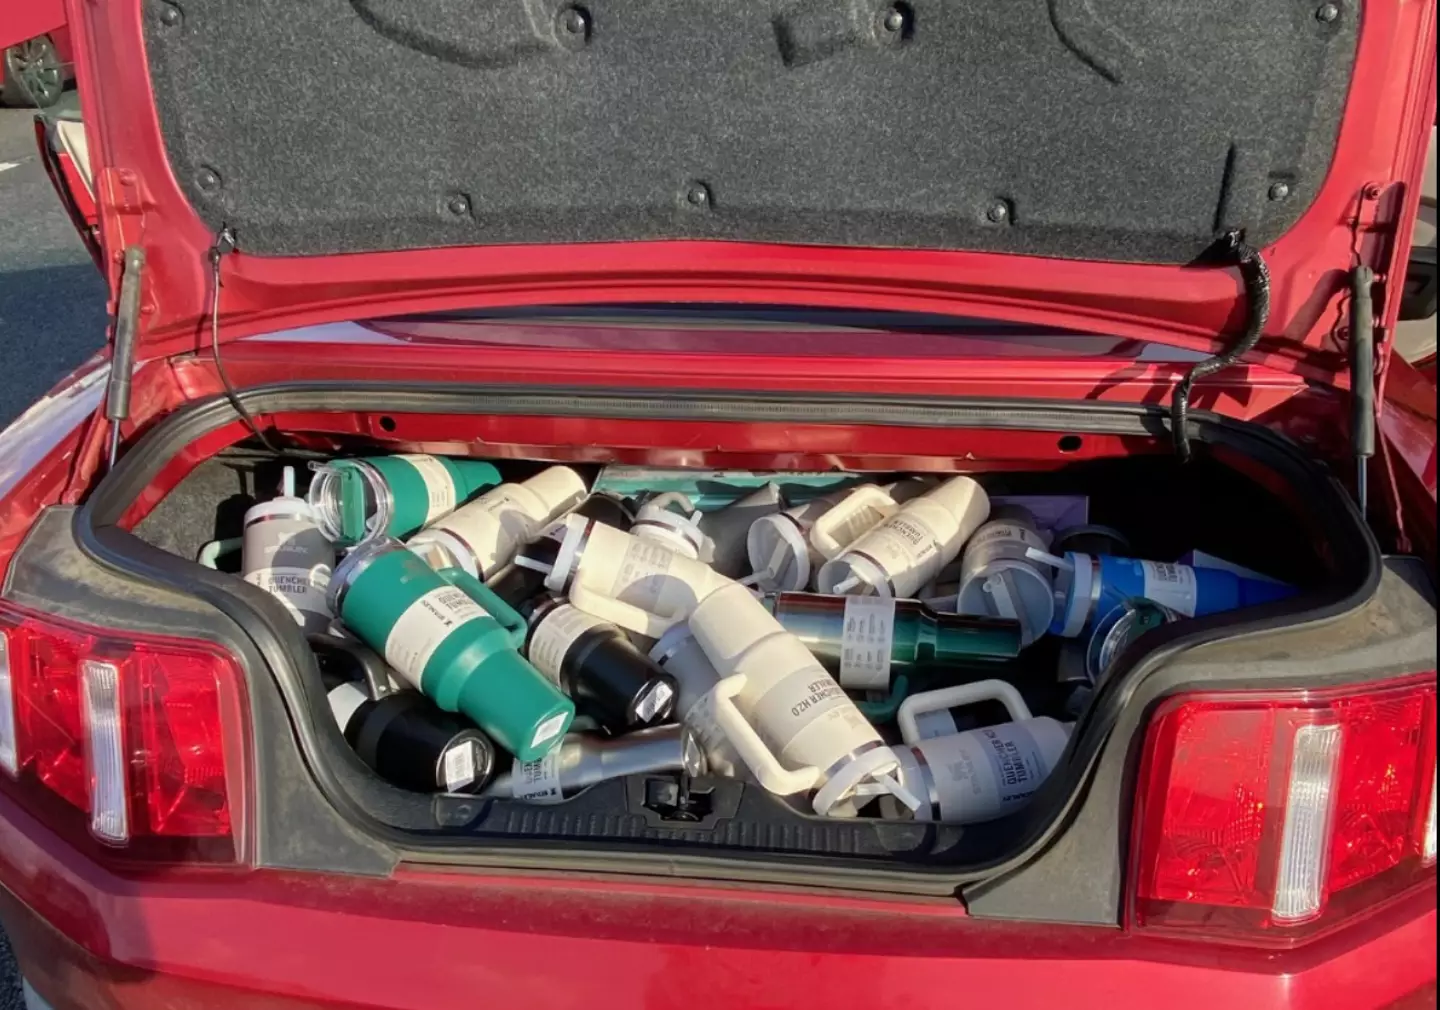 The trunk of the suspect's car was filled with Stanley products.